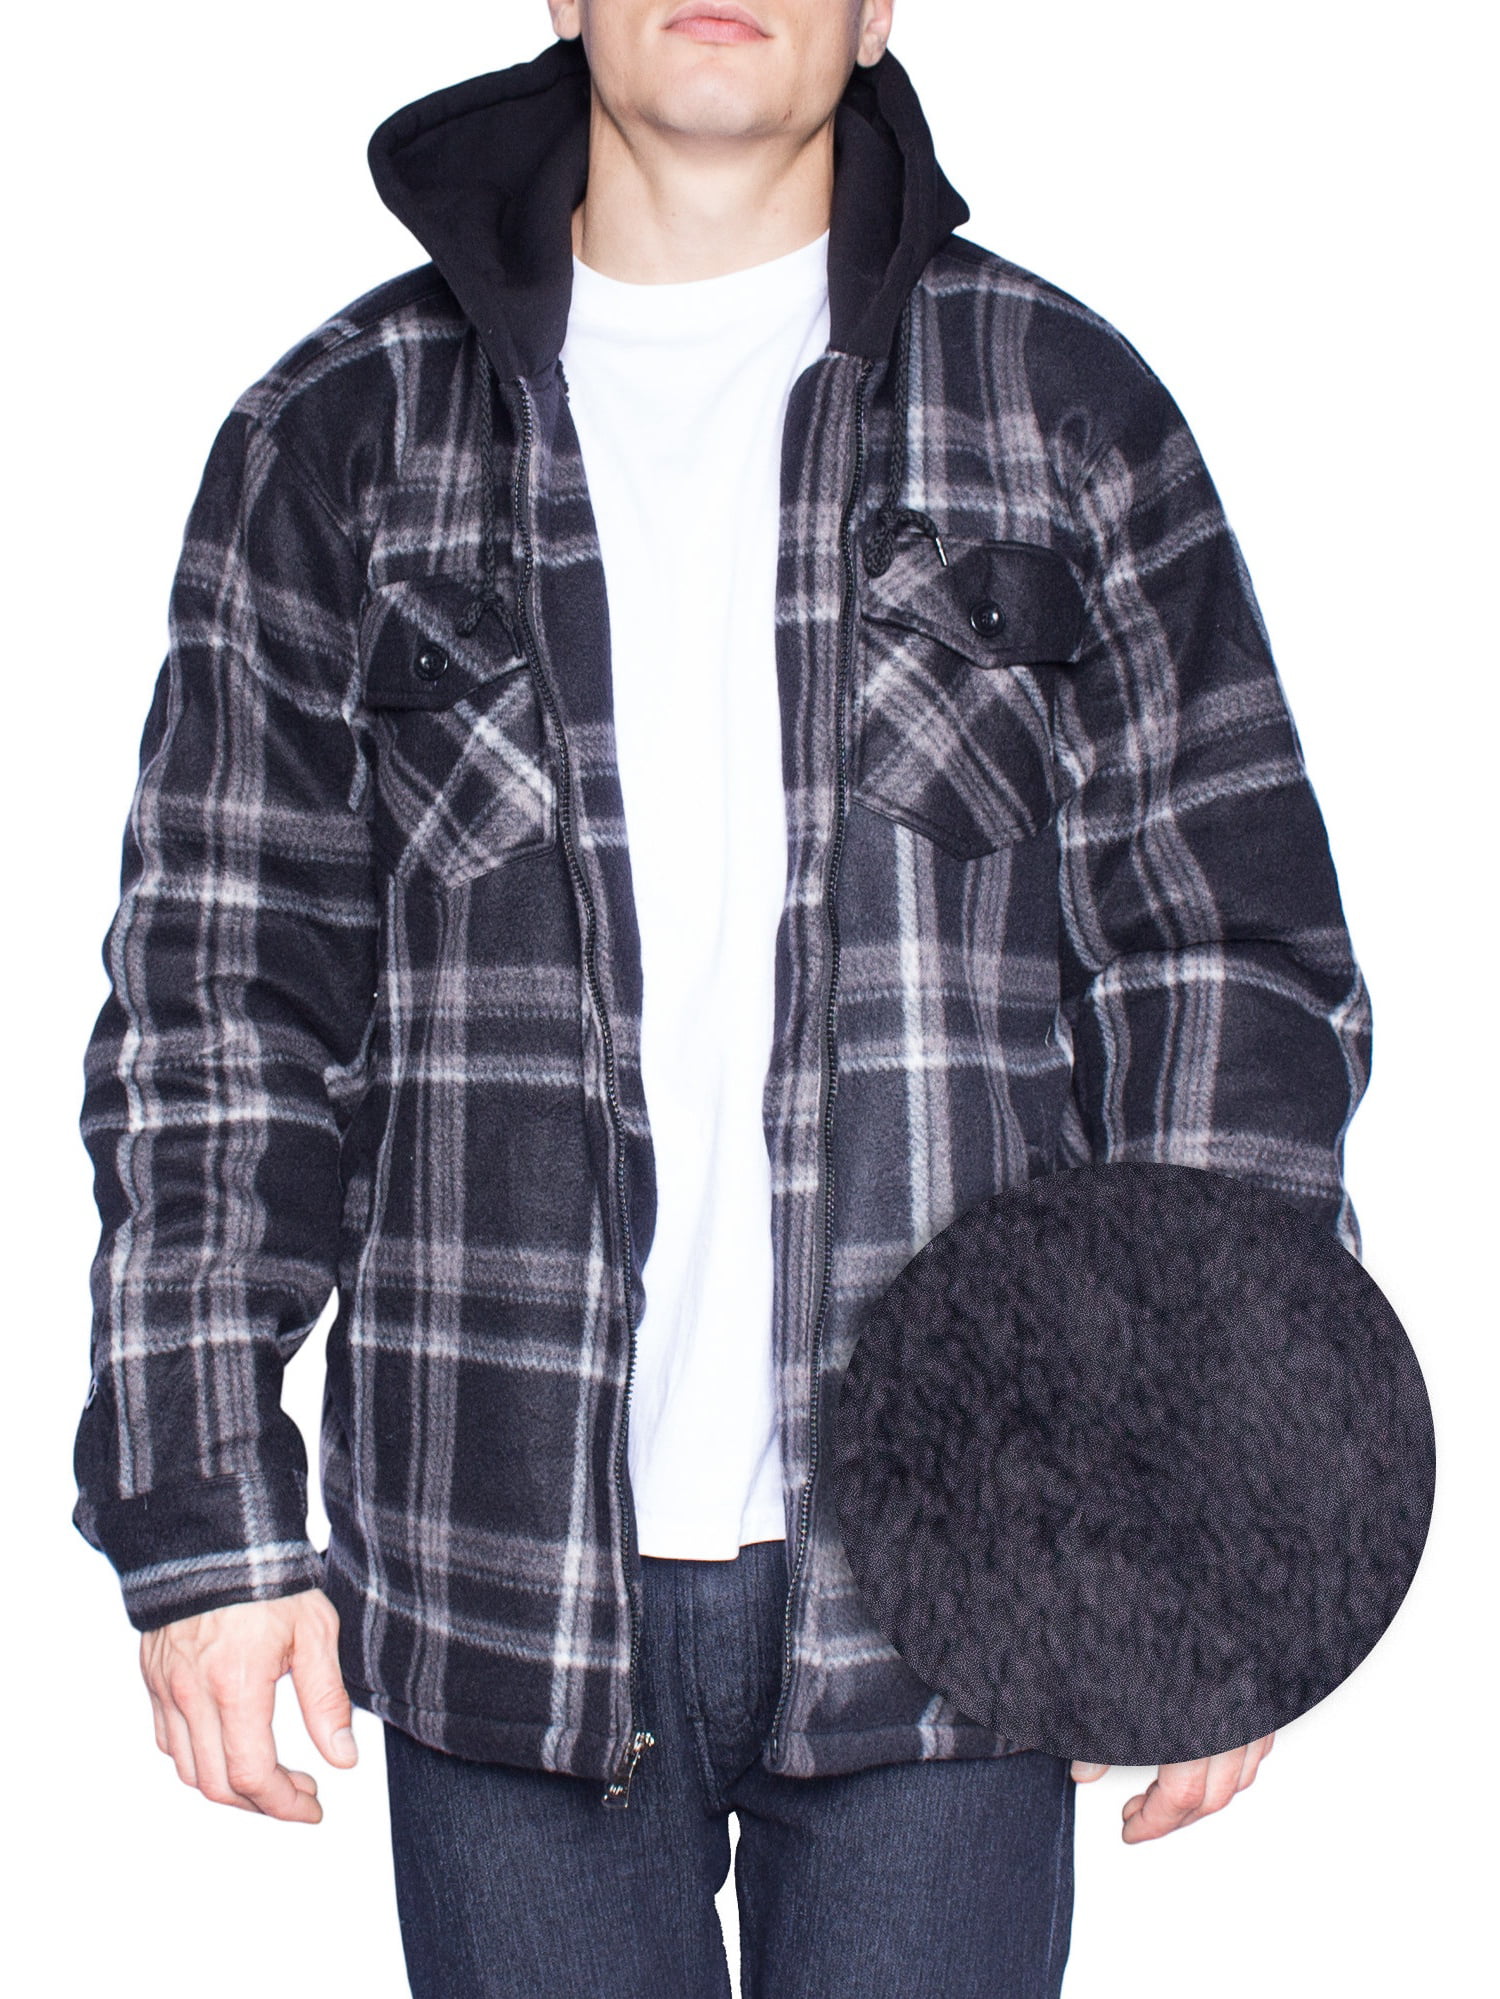 Visive - Mens Flannel Big And Tall Jackets For Men Zip Up Hoodie Sherpa ...